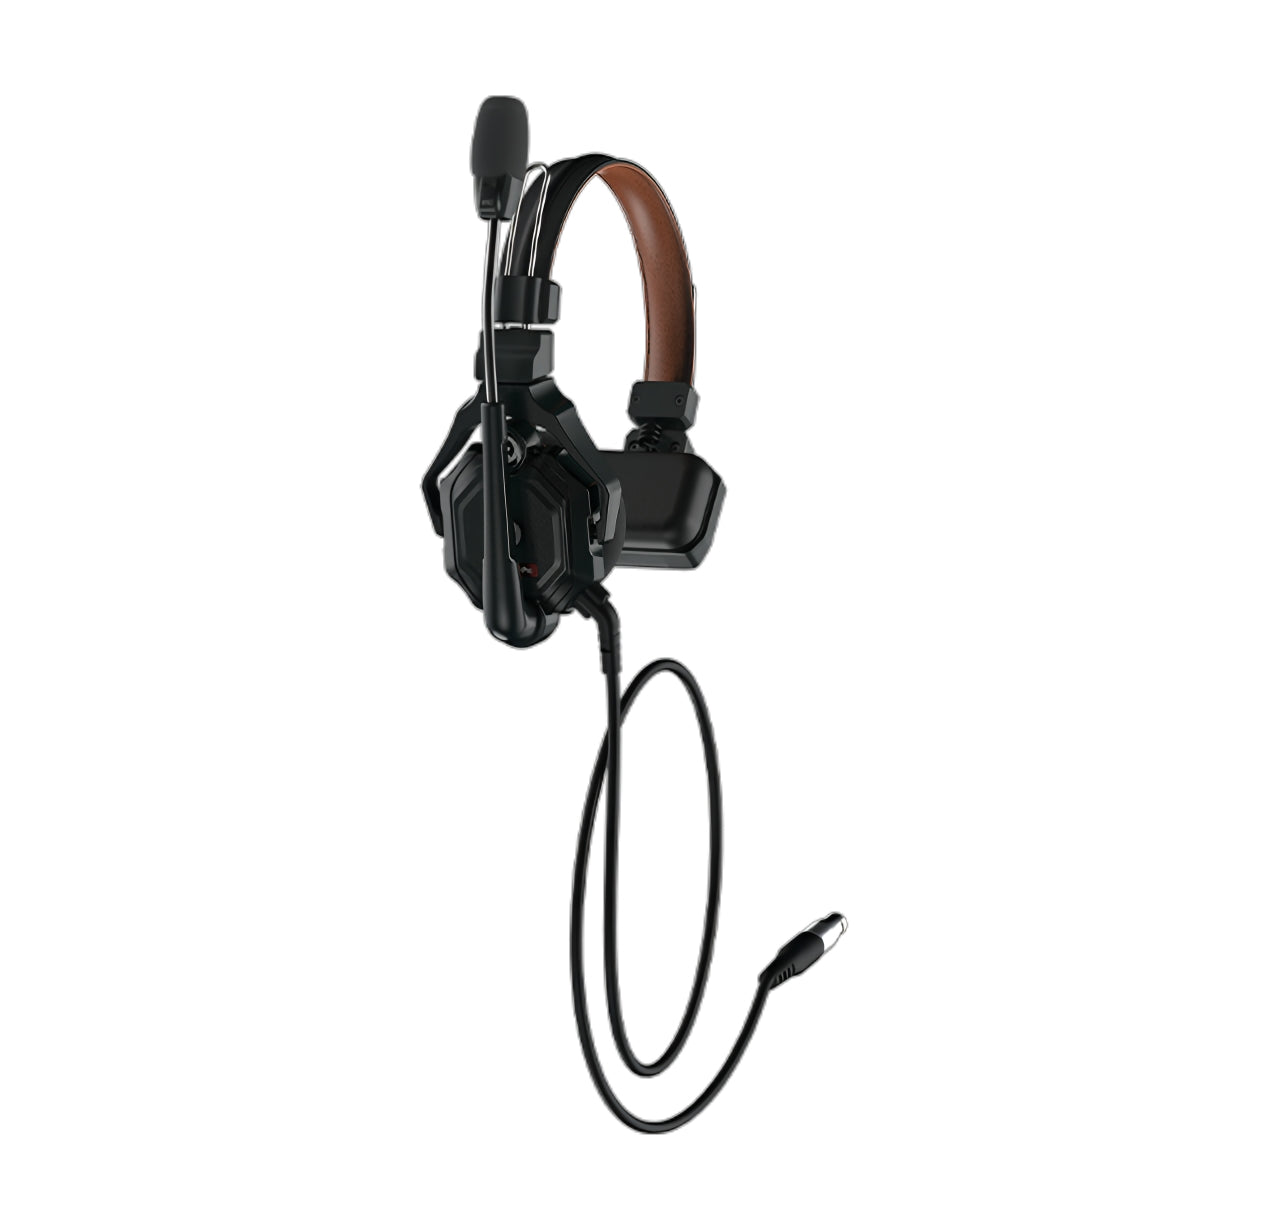 Solidcom C1 Pro Wired Headset for Hub – Hollyland